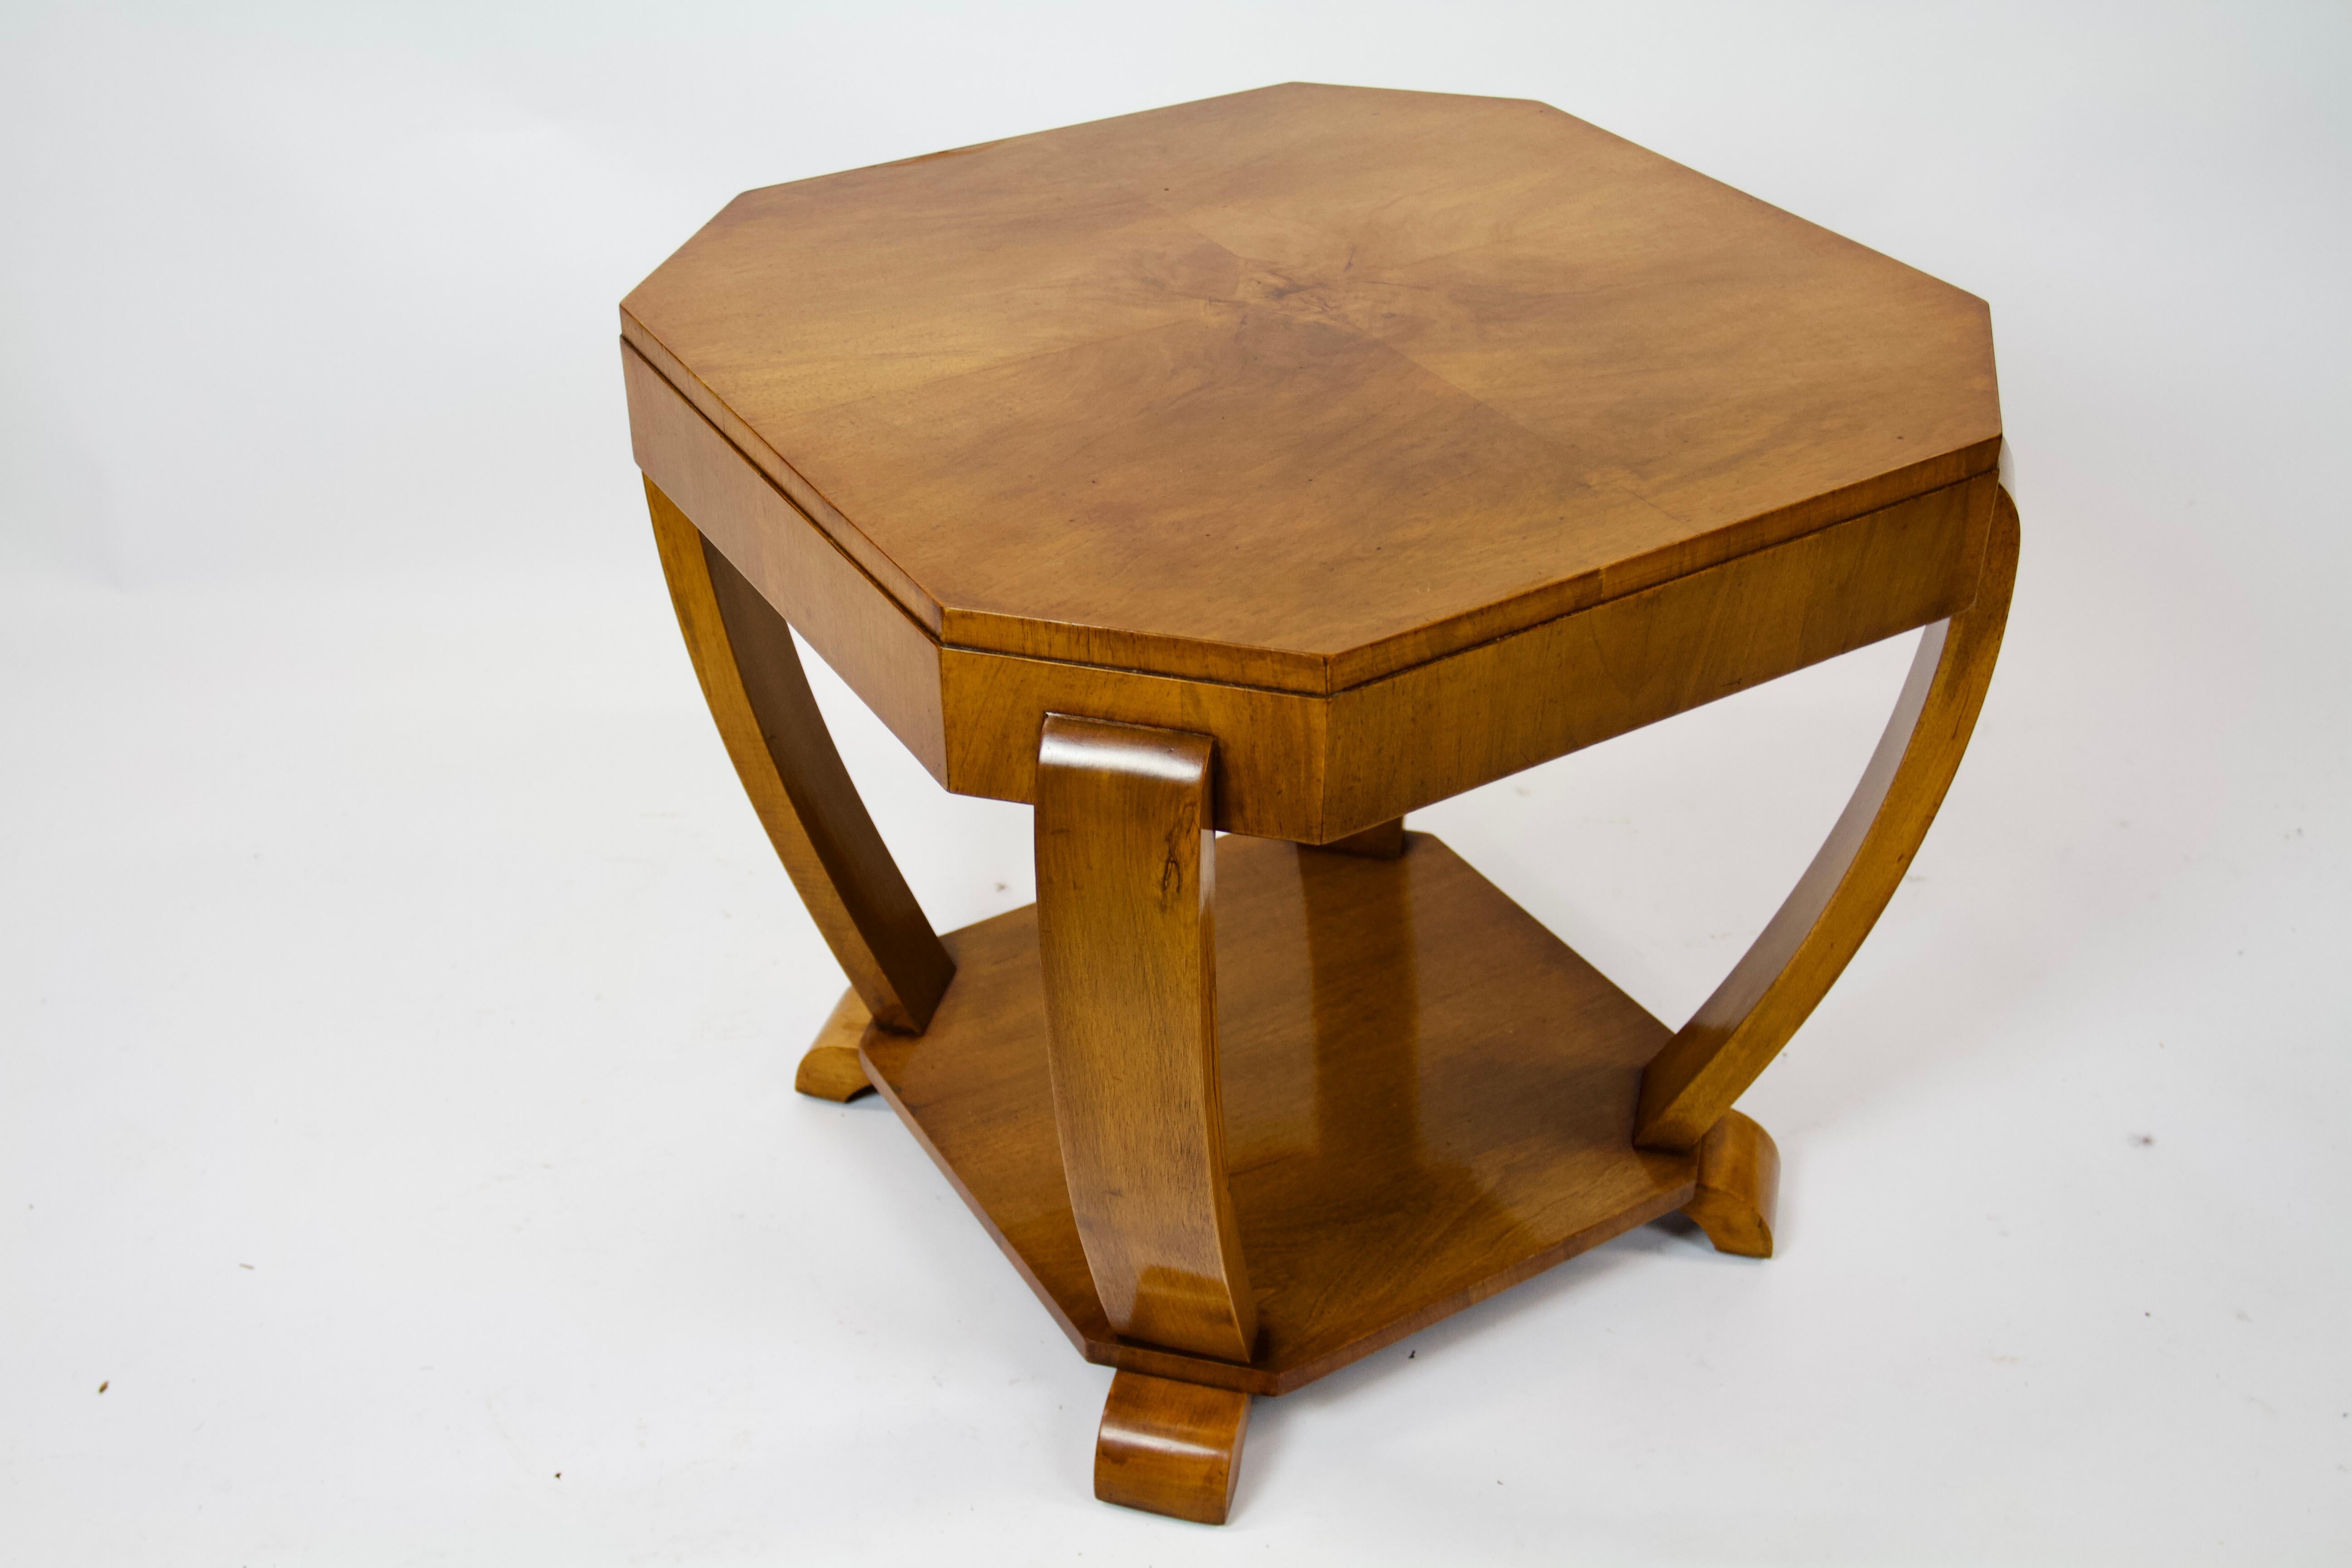 Polished Art Deco Walnut Canted Corner 2 tier Coffee Table circa 1930s For Sale